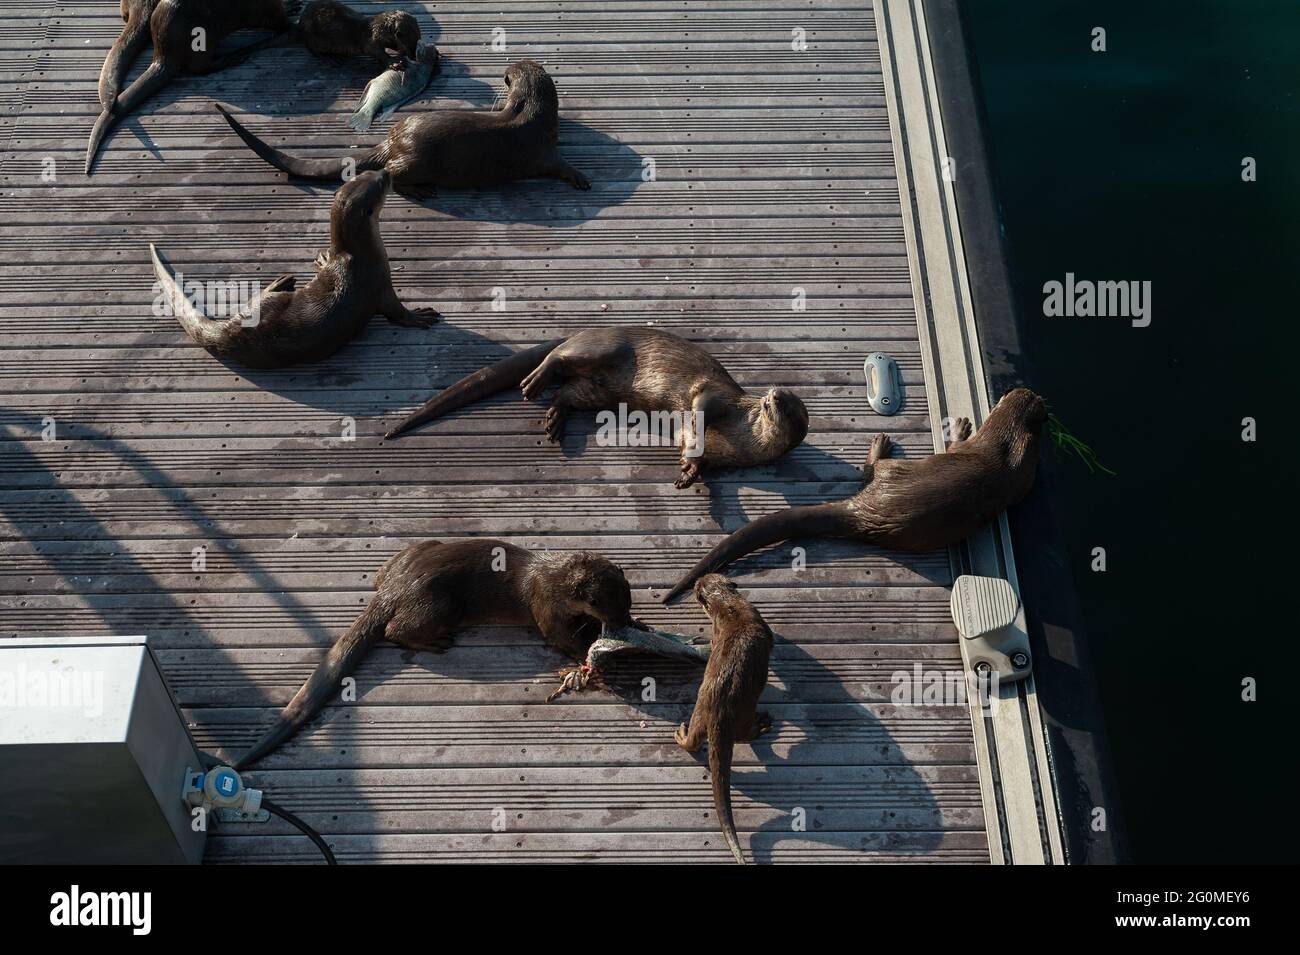 25.05.2021, Singapore, Republic of Singapore, Asia - Group of smooth-coated otters of the so-called Bishan Otter Family that resides around Marina Bay. Stock Photo